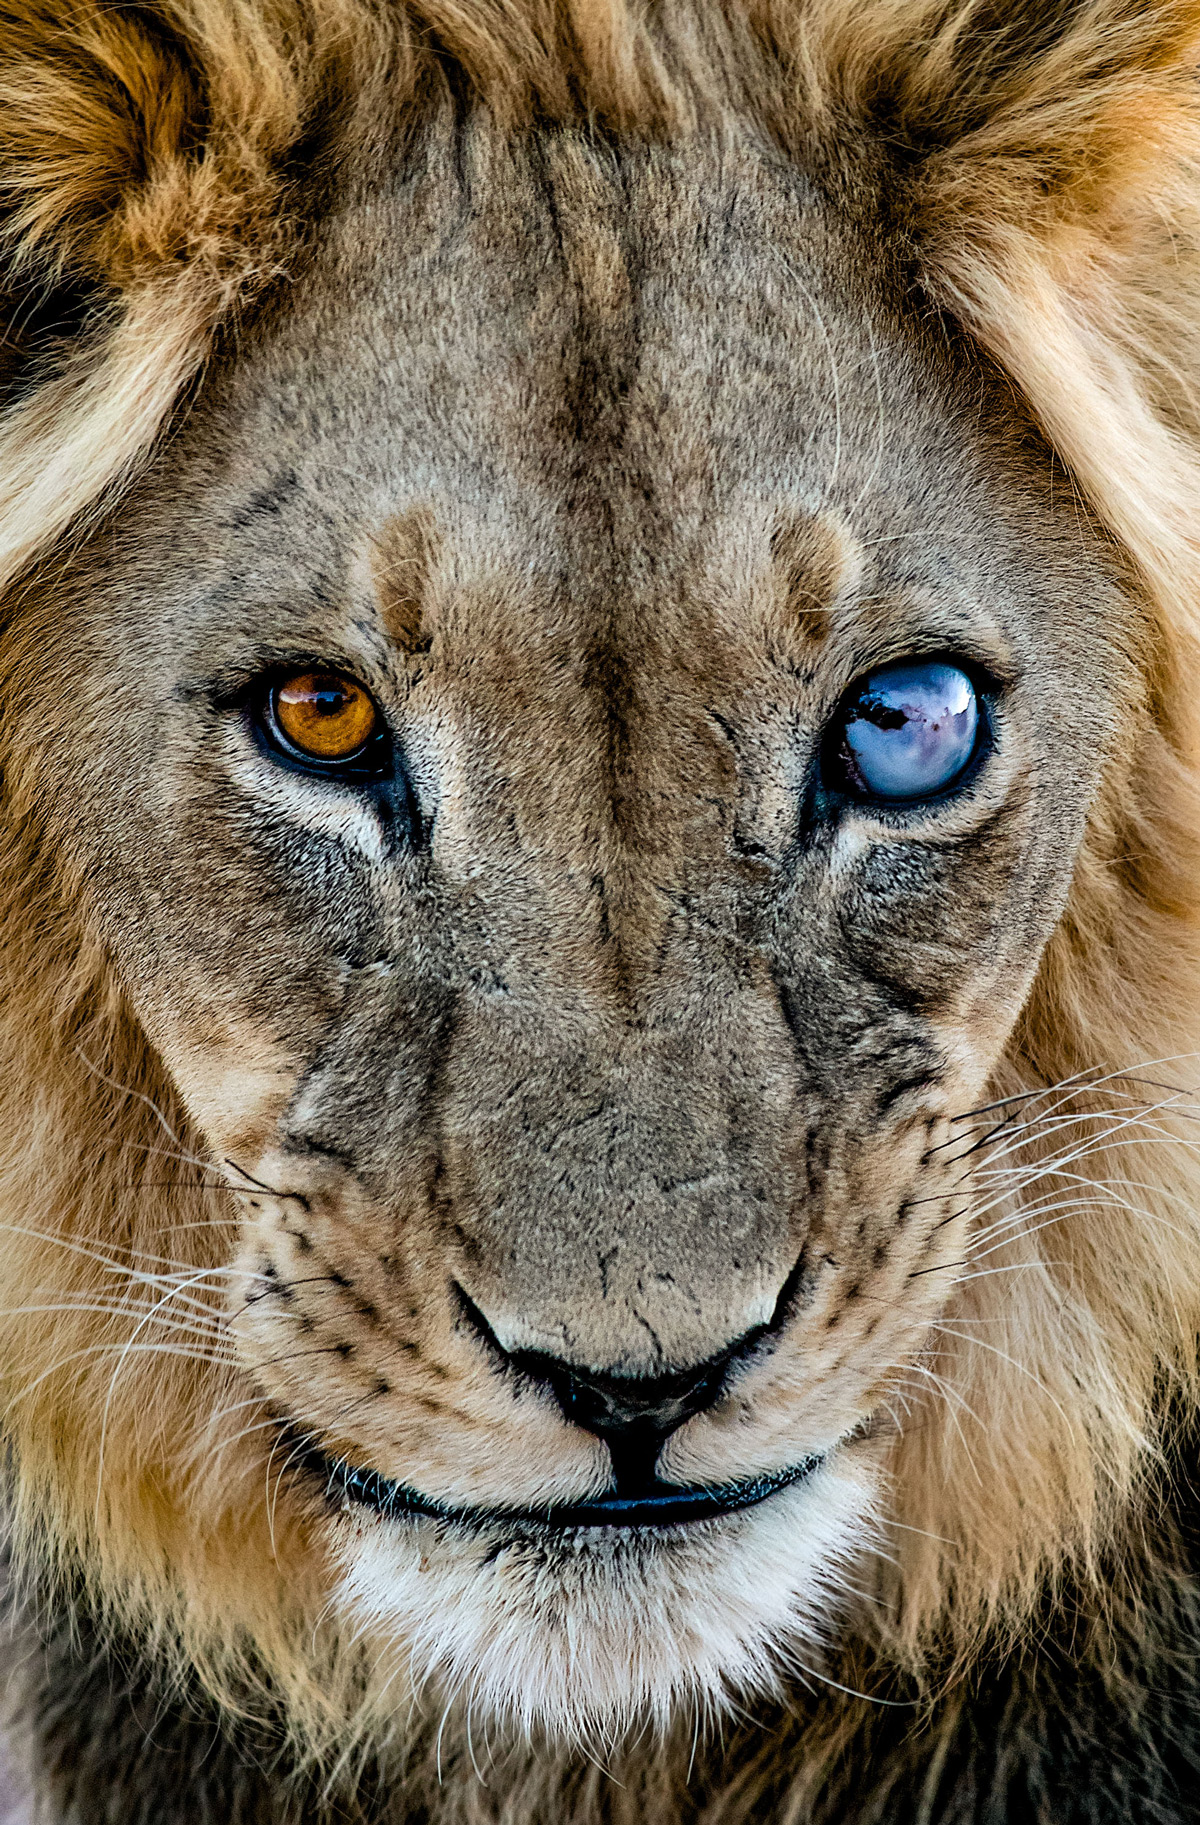 “Sun and moon” – a lion, blind in one eye, in Kgalagadi Transfrontier Park, South Africa © Ernest Porter